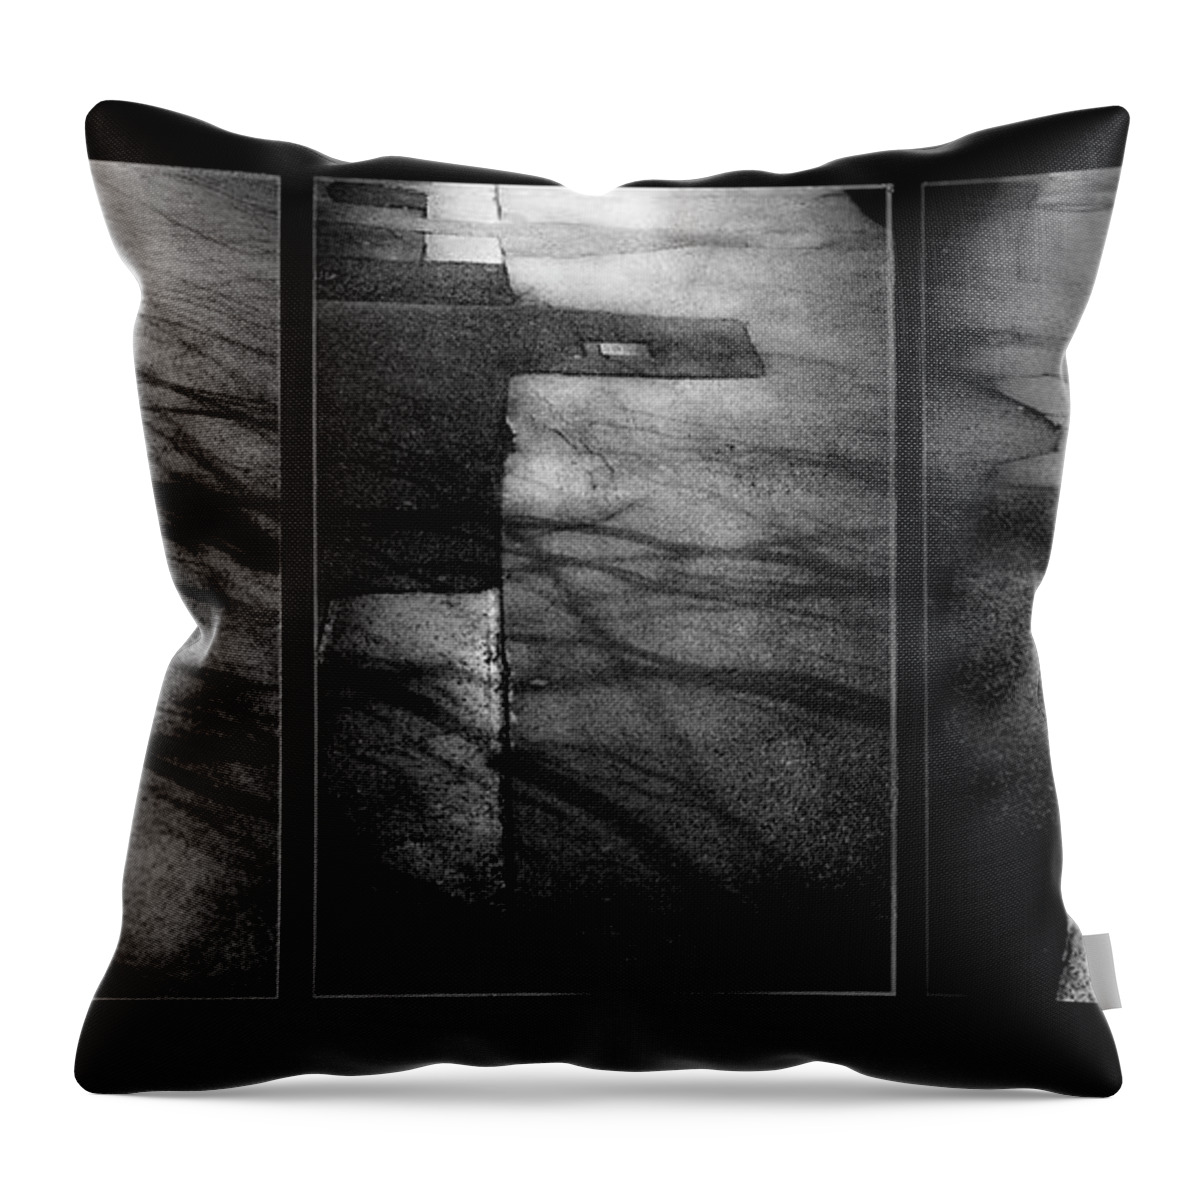 Walk Throw Pillow featuring the photograph Our Endless Walk by Dorit Fuhg